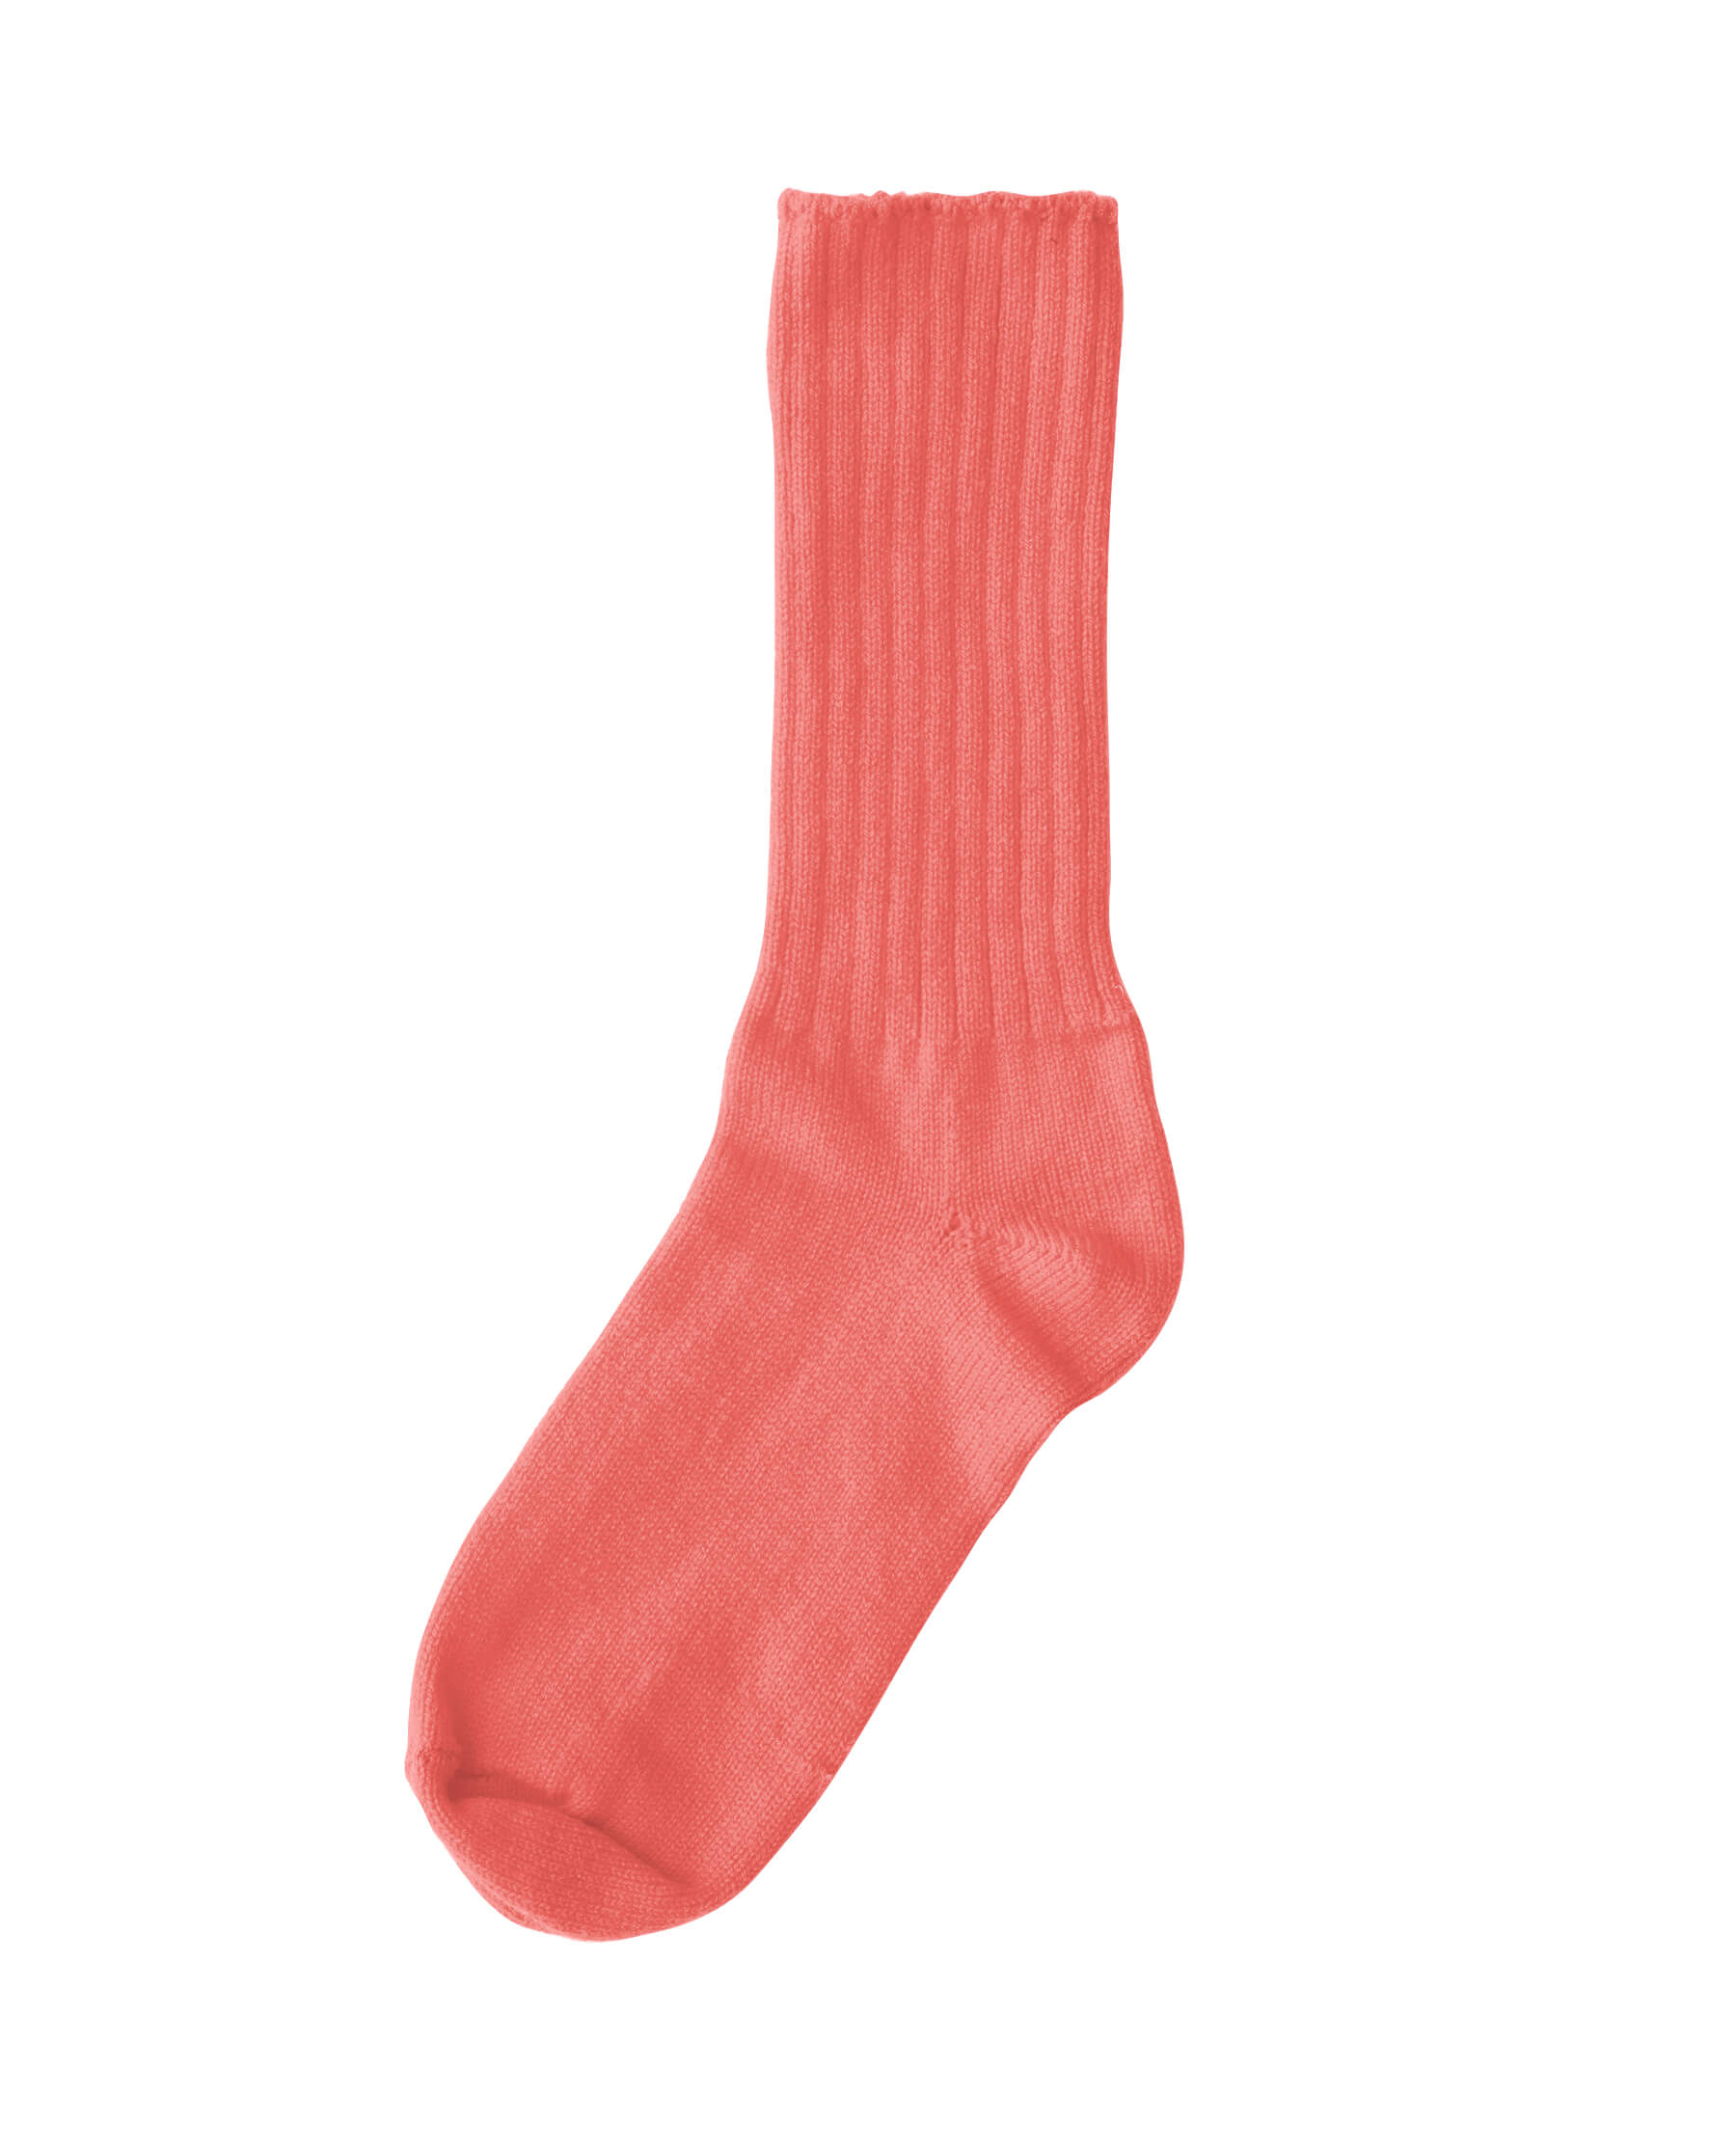 The Cashmere Sock. -- Bright Rose